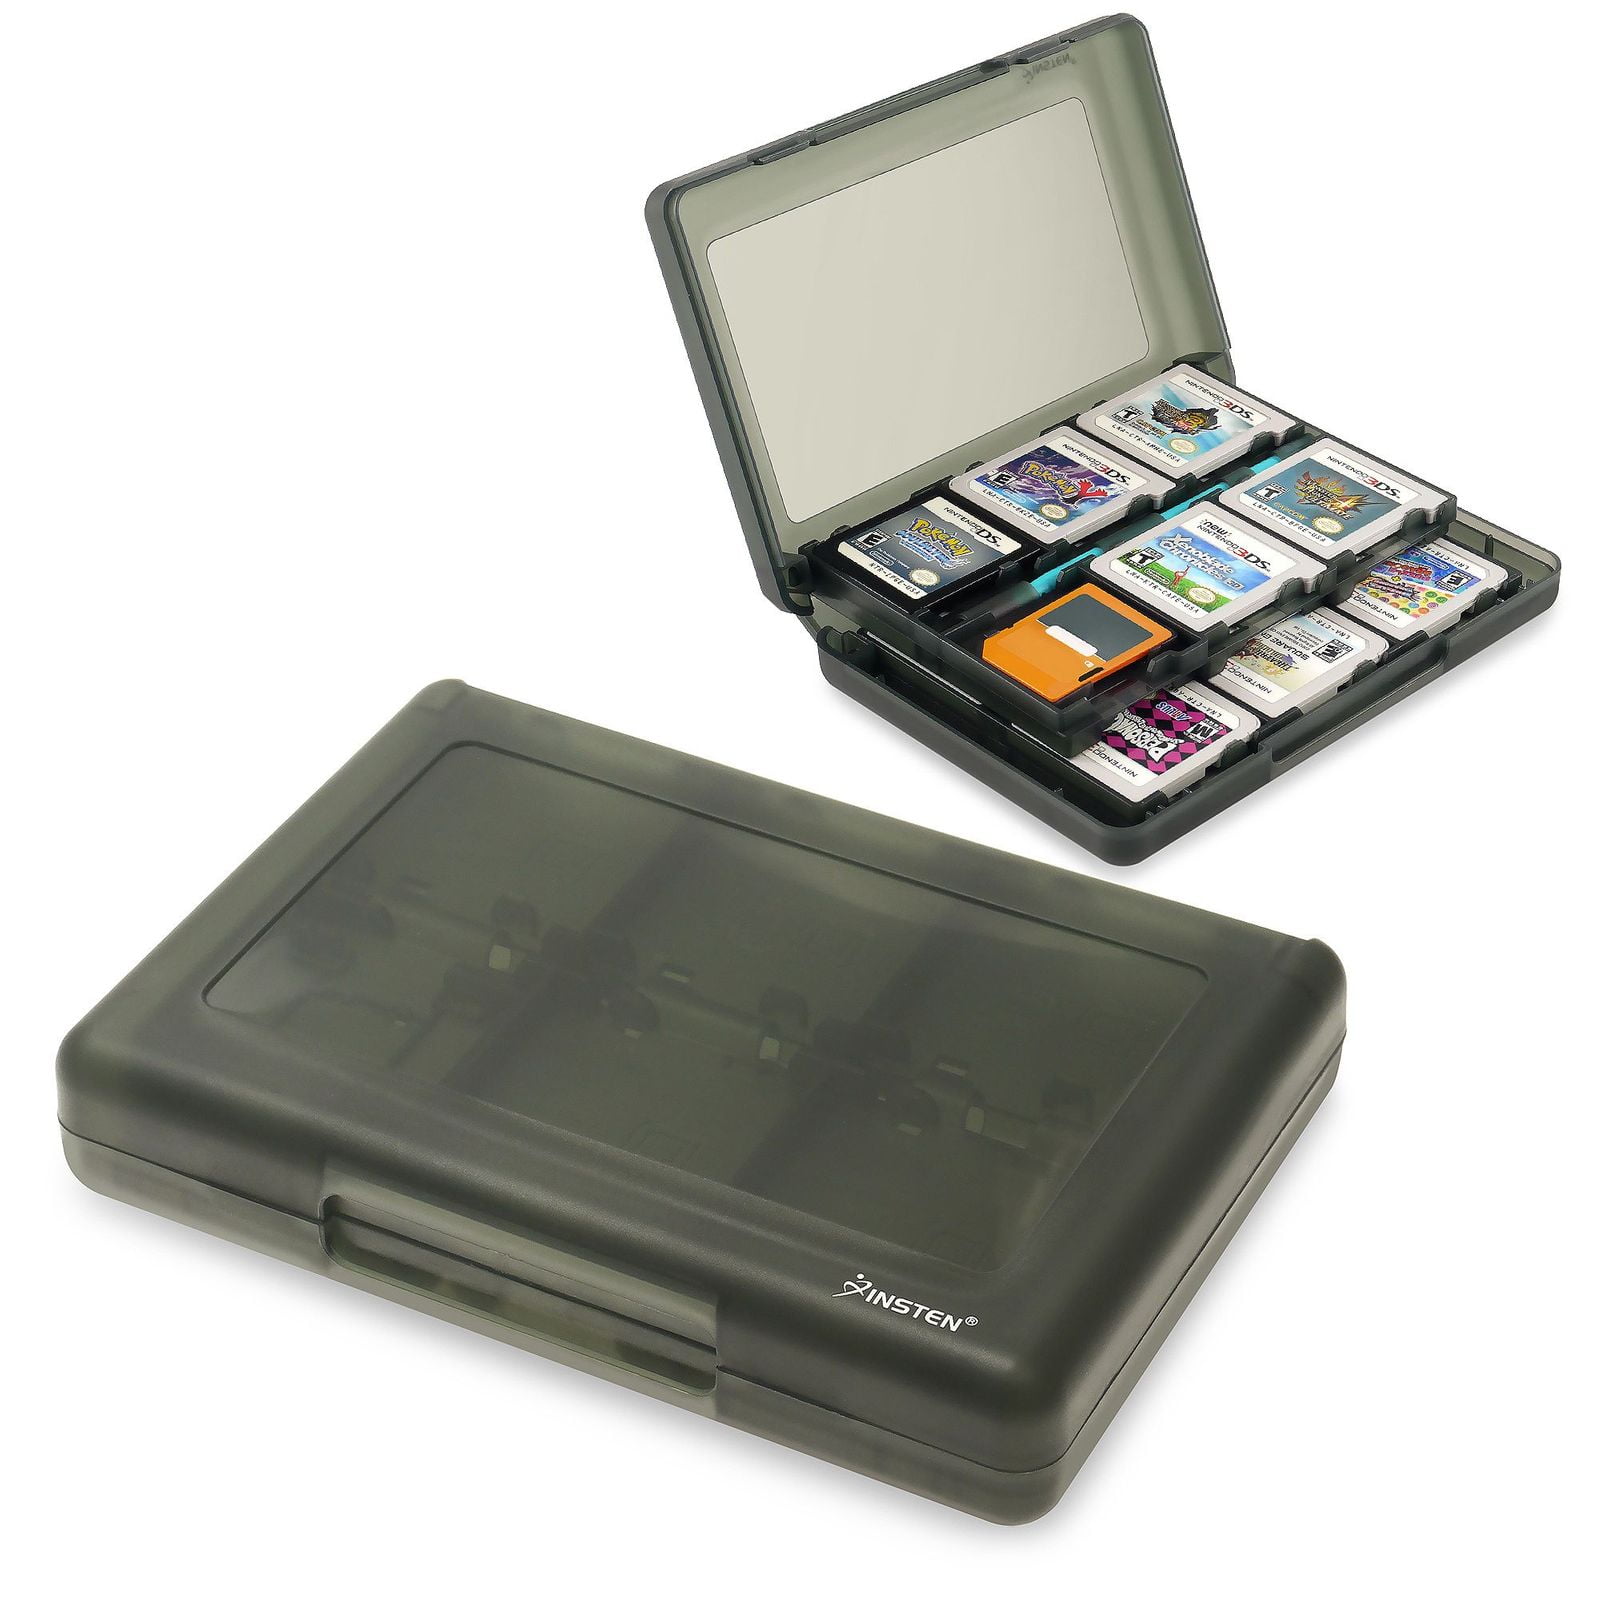 24-in-1 Game Card Case for Nintendo NEW 3DS / 3DS / DSi / DSi DSi LL / 3DS XL LL / DS / DS Lite NDS Game Storage Holder Smoke - Walmart.com